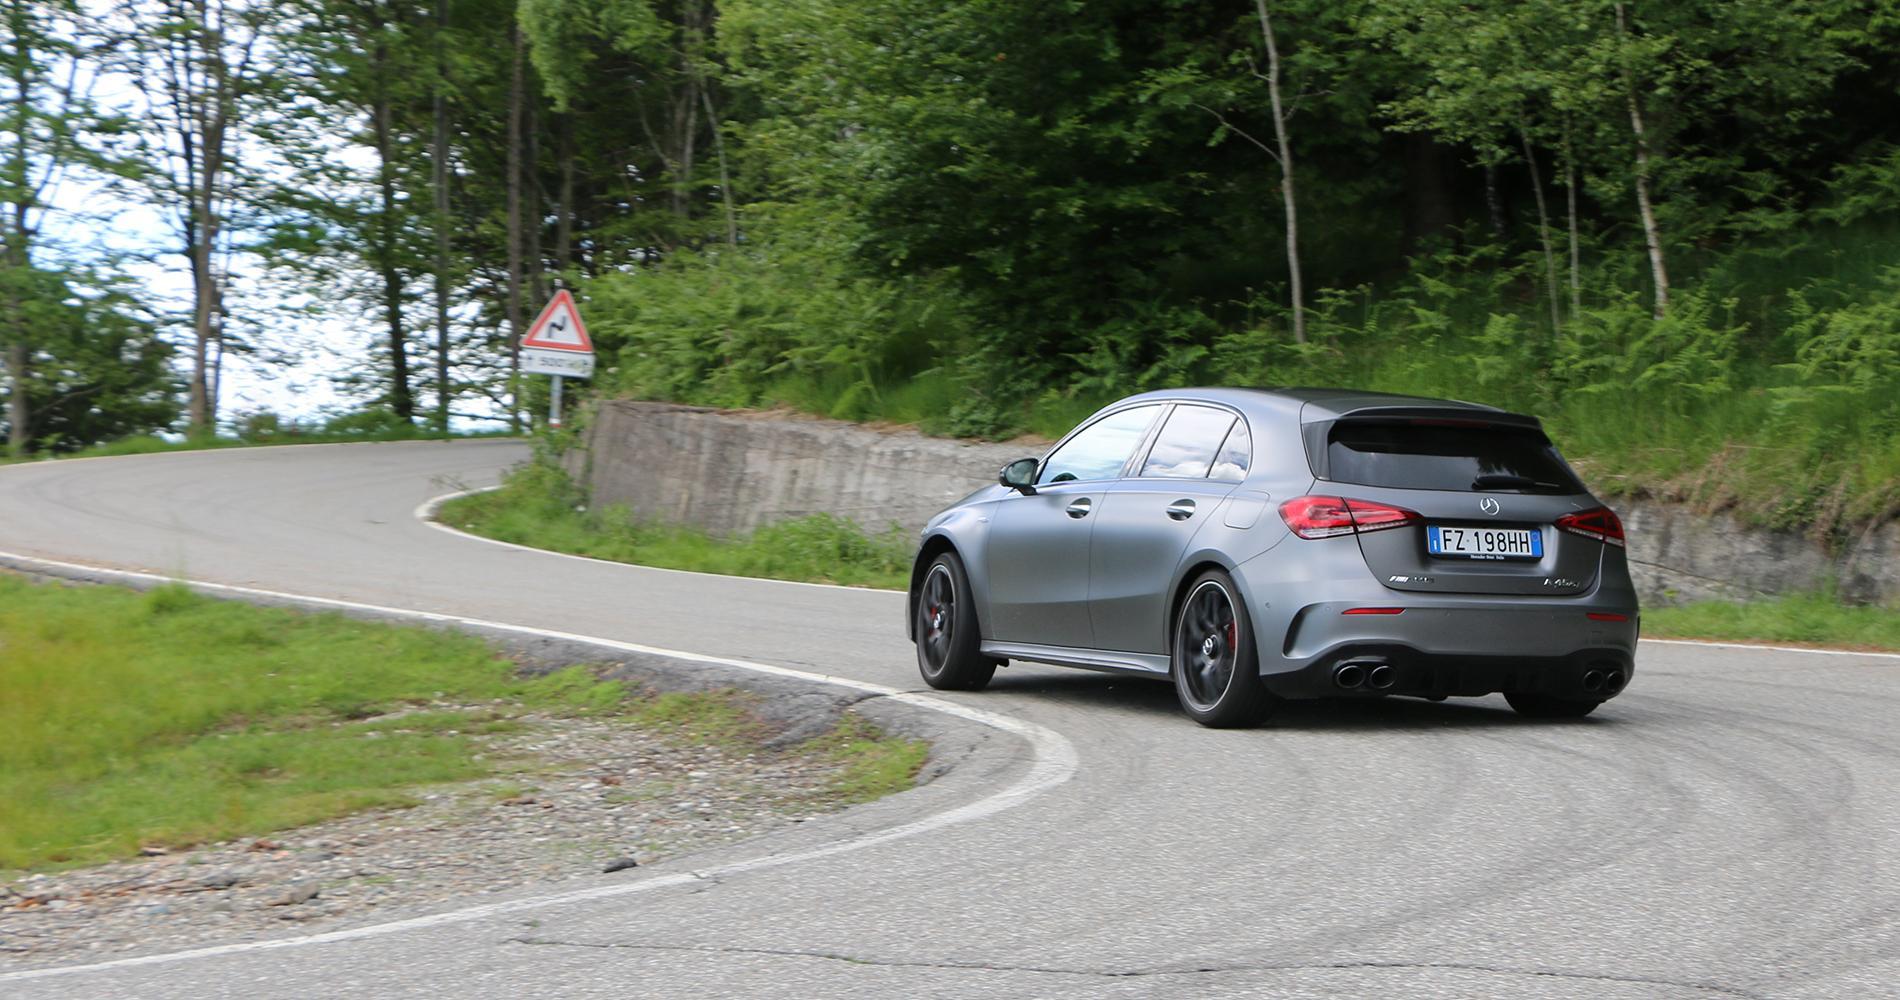 Mercedes-AMG A 45 S oversteering